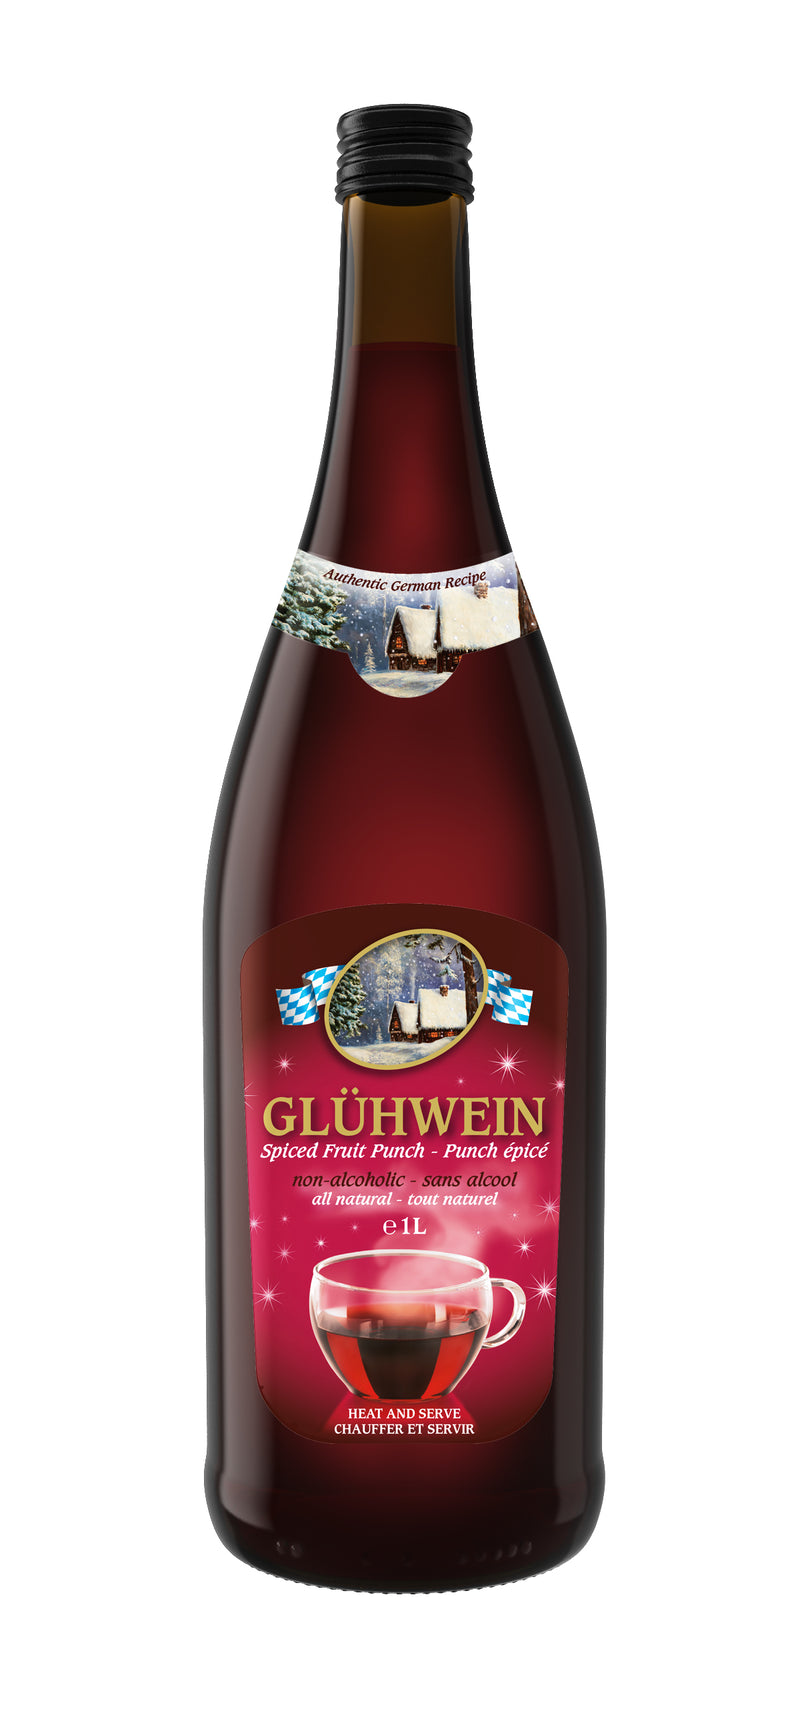 One litre bottle of Gluhwein. This is nonalcoholic spiced punch